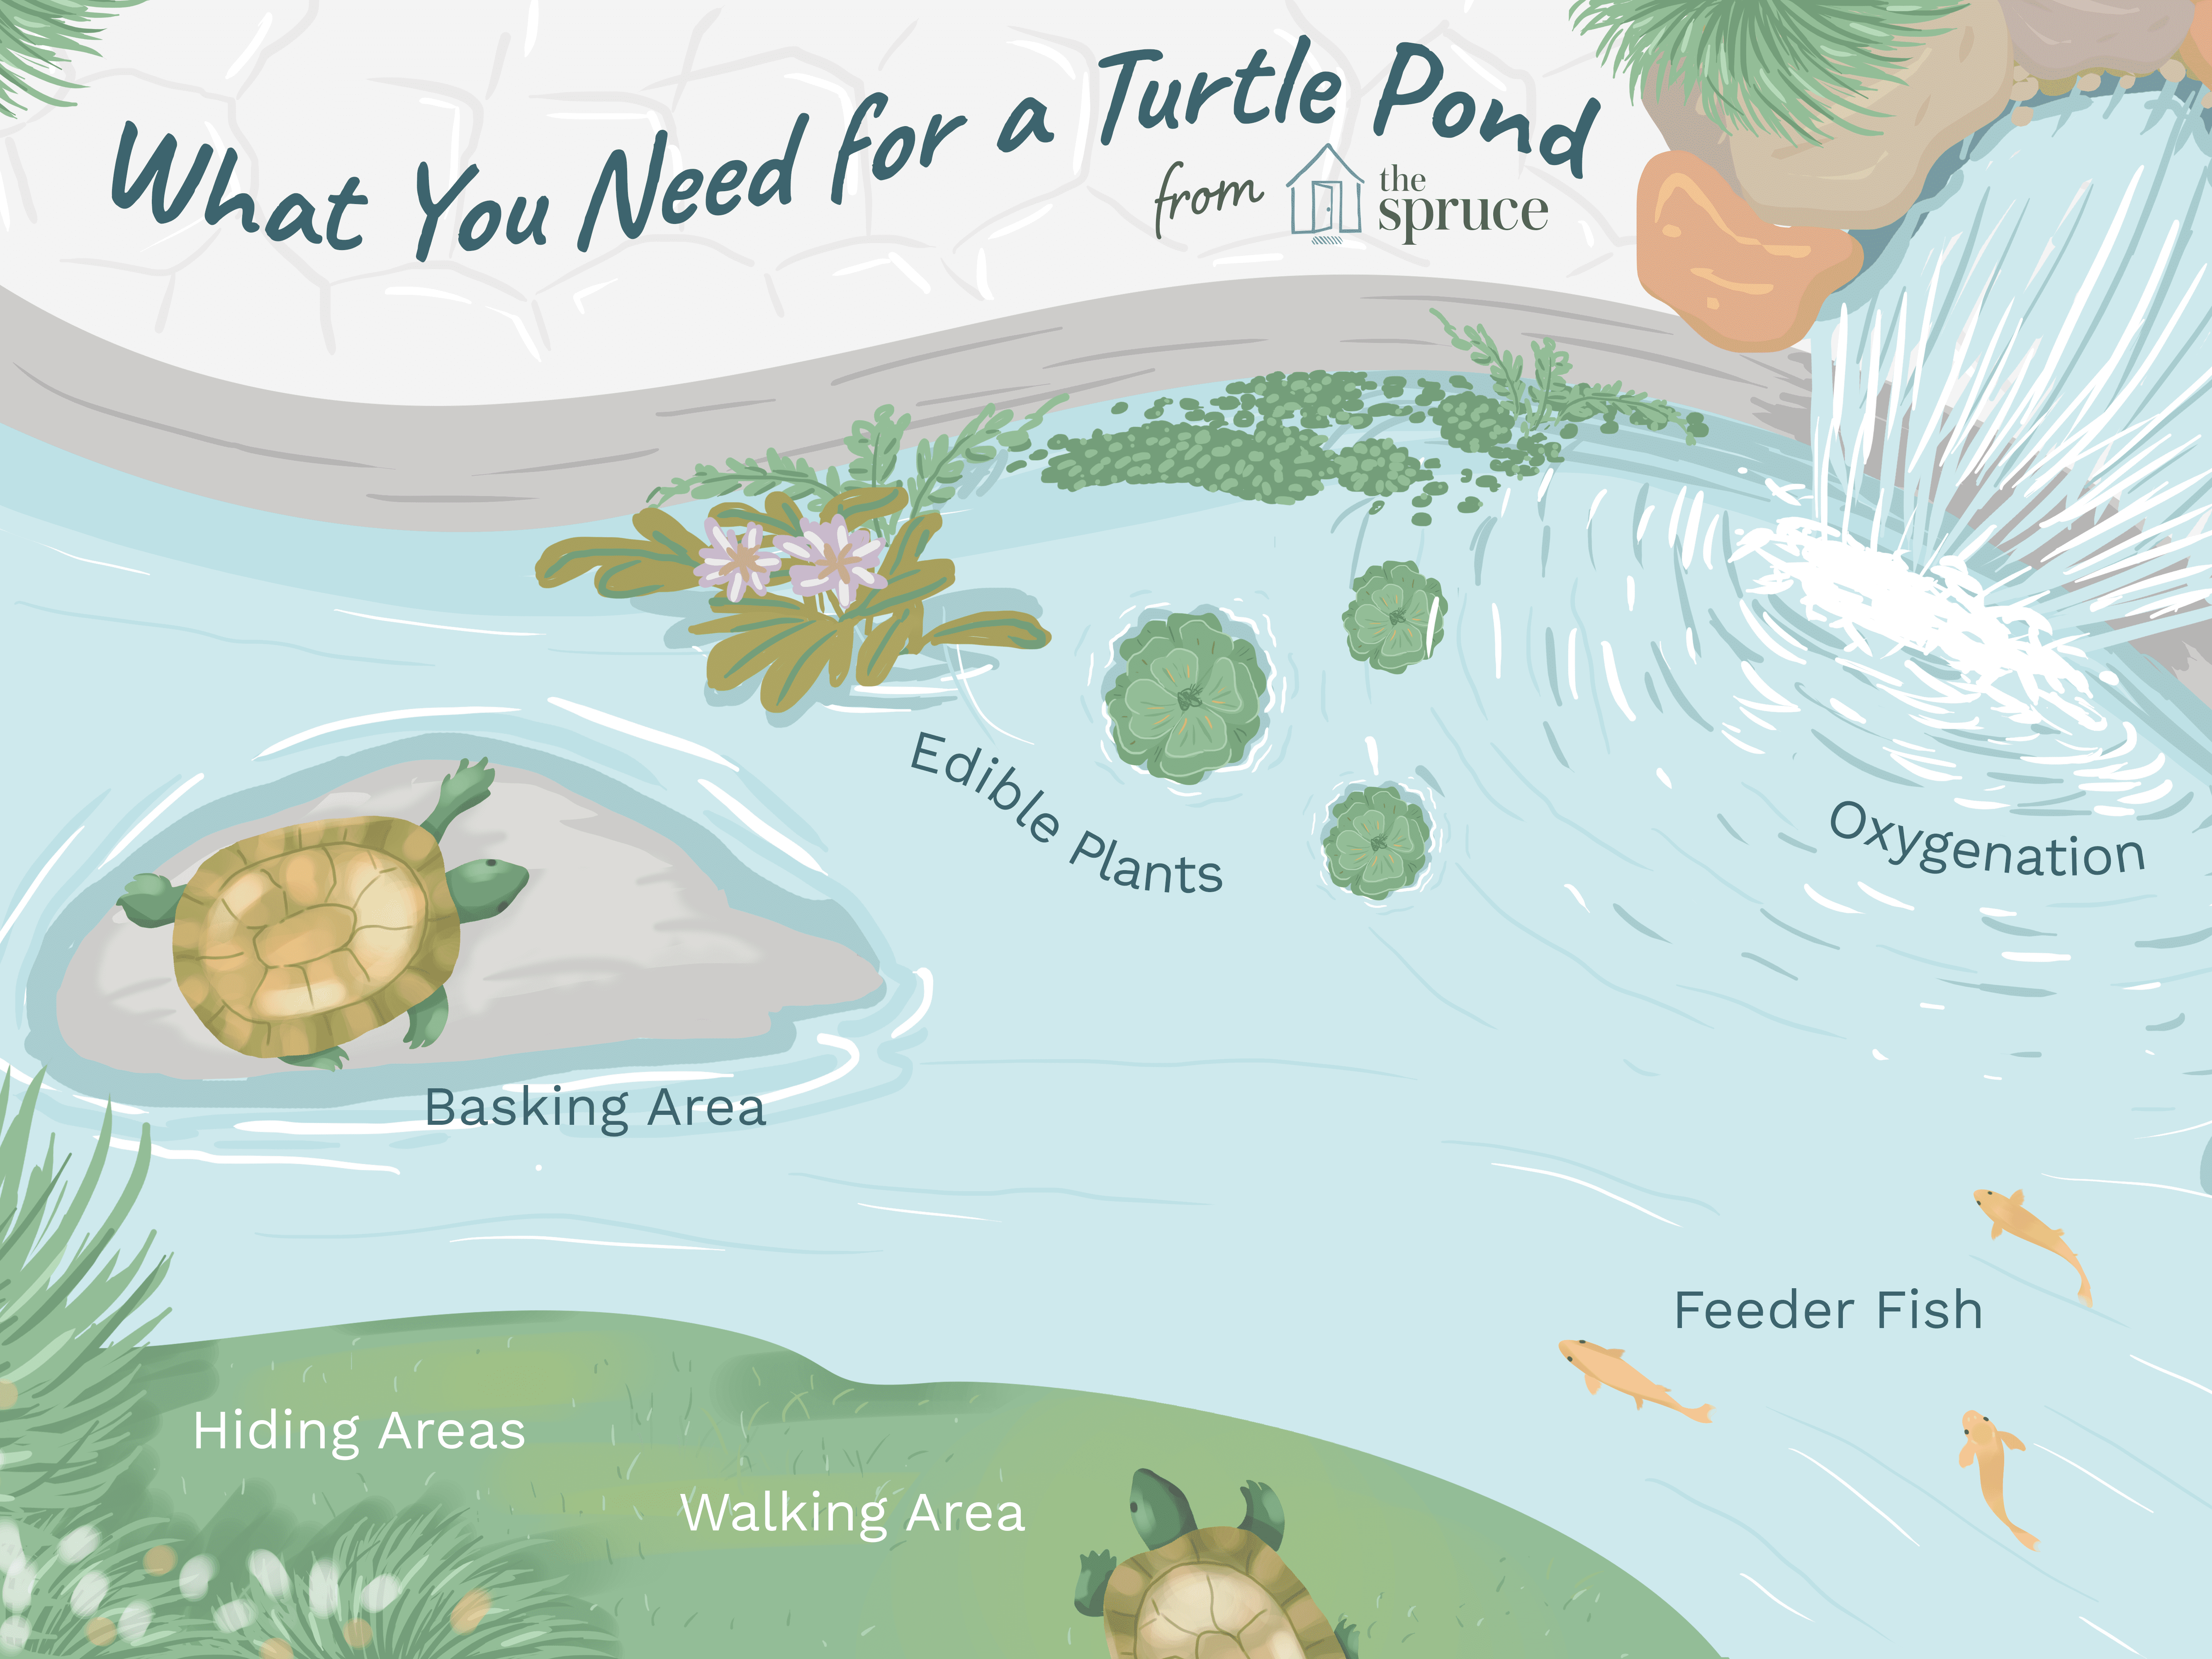 Can turtles live in backyard ponds?